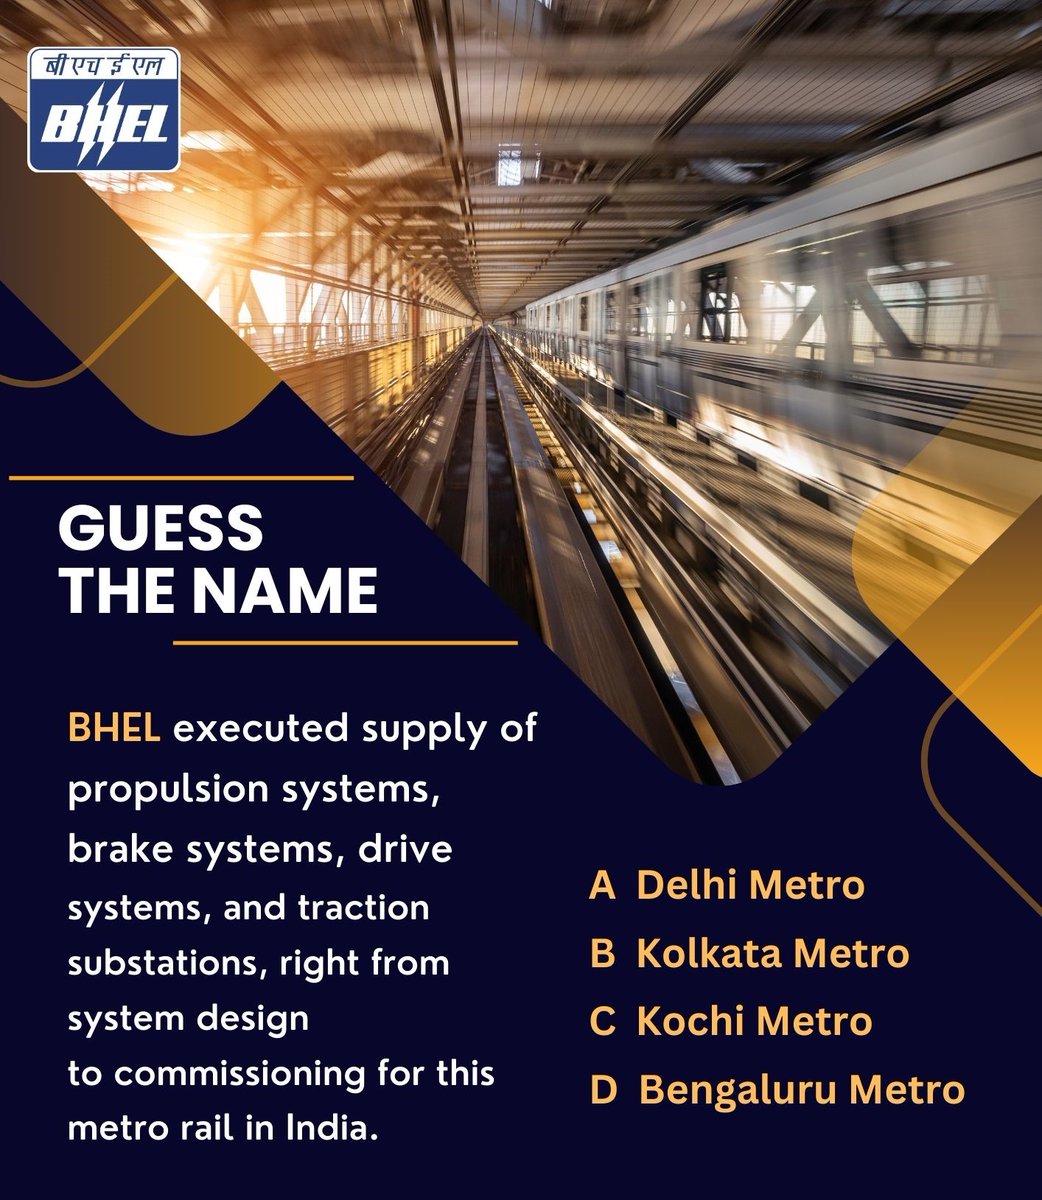 #BHEL executed supply of propulsion systems, brake systems, drive systems, and traction substations, right from system design to commissioning for this metro rail in India. Guess the name of this metro rail from the options and give your answer in the comments section below.